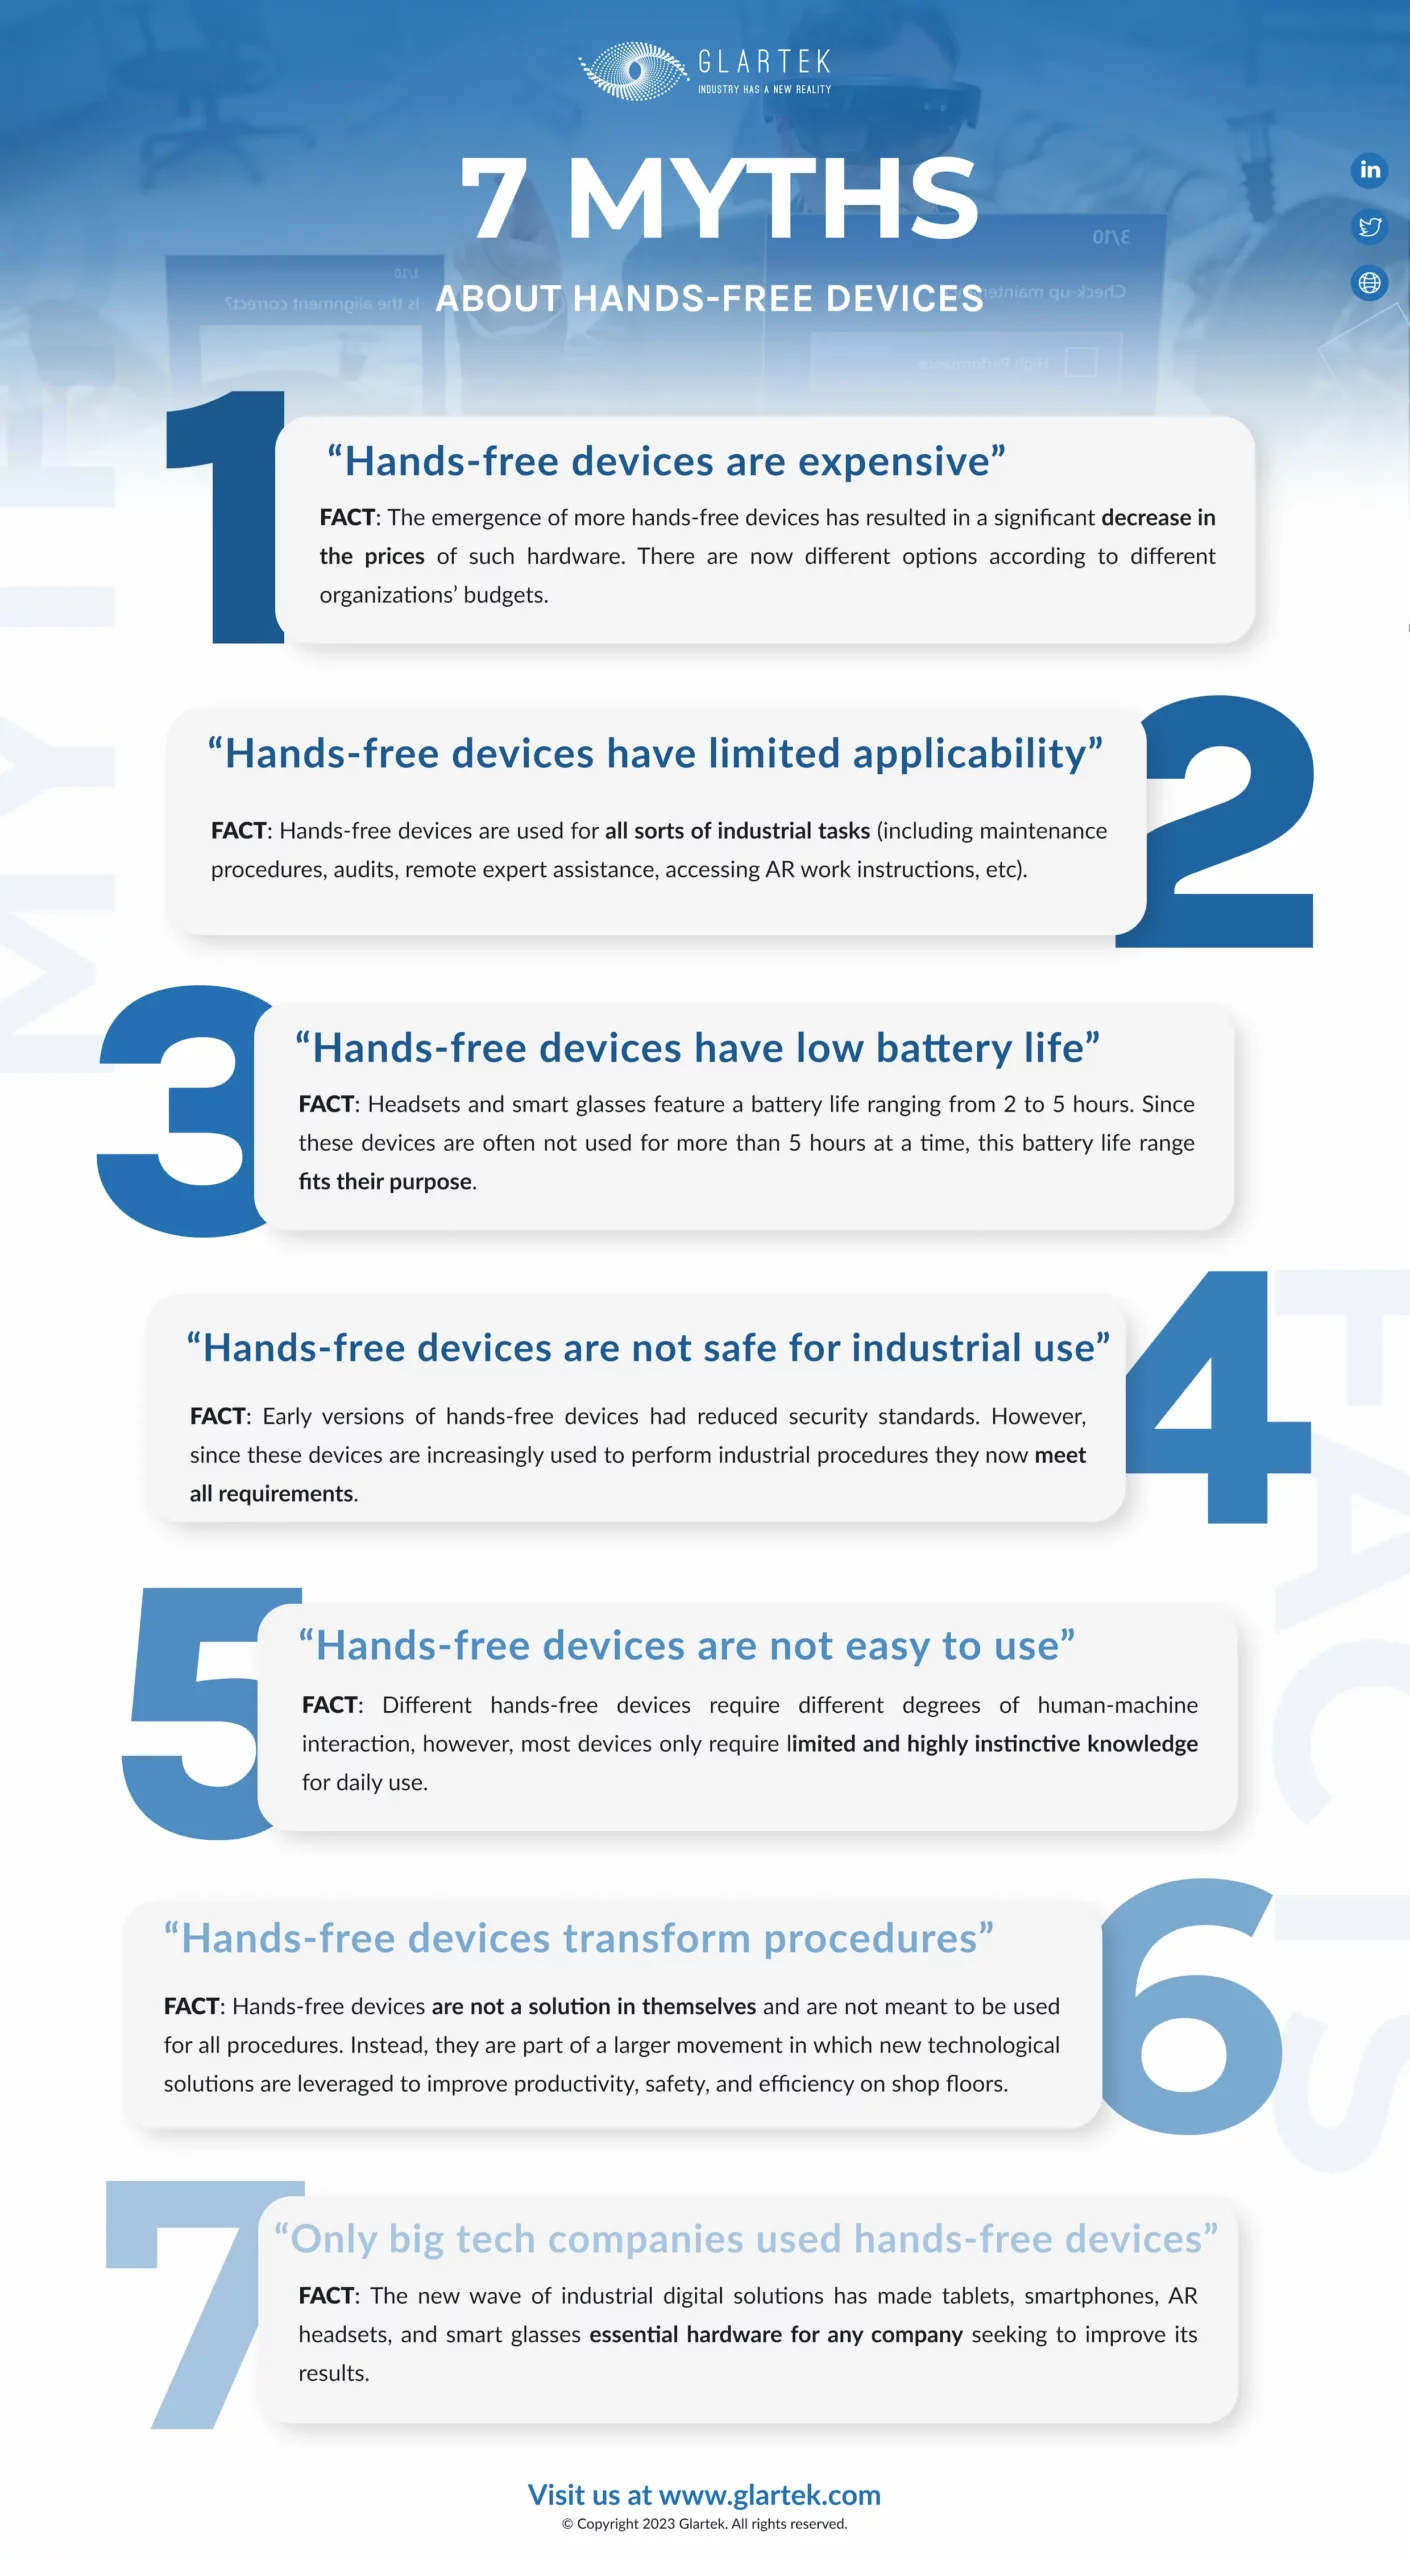 7-myths-about-hands-free-devices